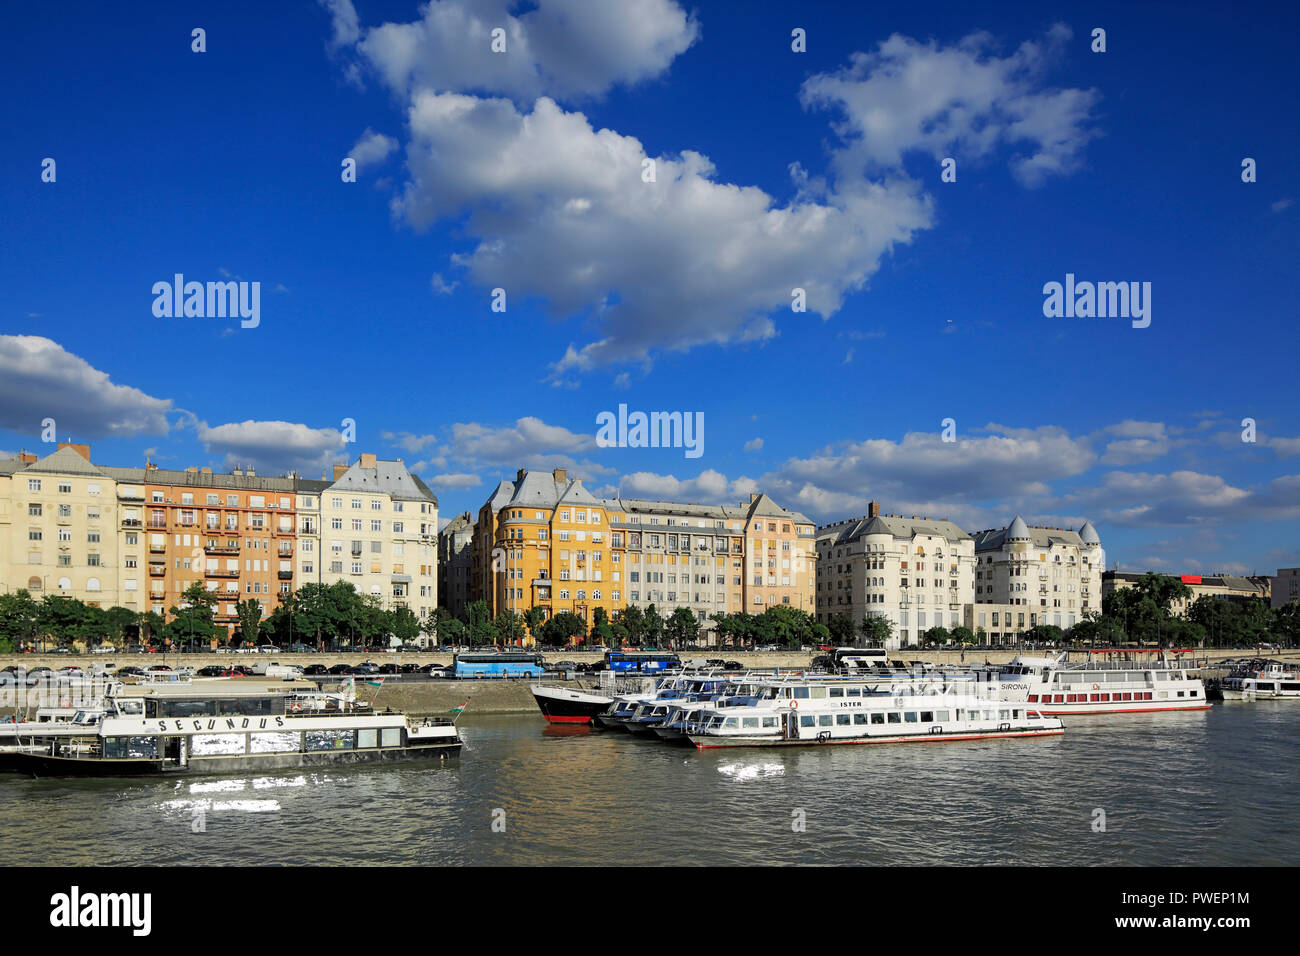 Hungary, Central Hungary, Budapest, Danube, Capital City, Danube bank of Pest, Danube landscape, business houses and residential buildings, shipping pier, ships, river navigation, UNESCO World Heritage Site Stock Photo